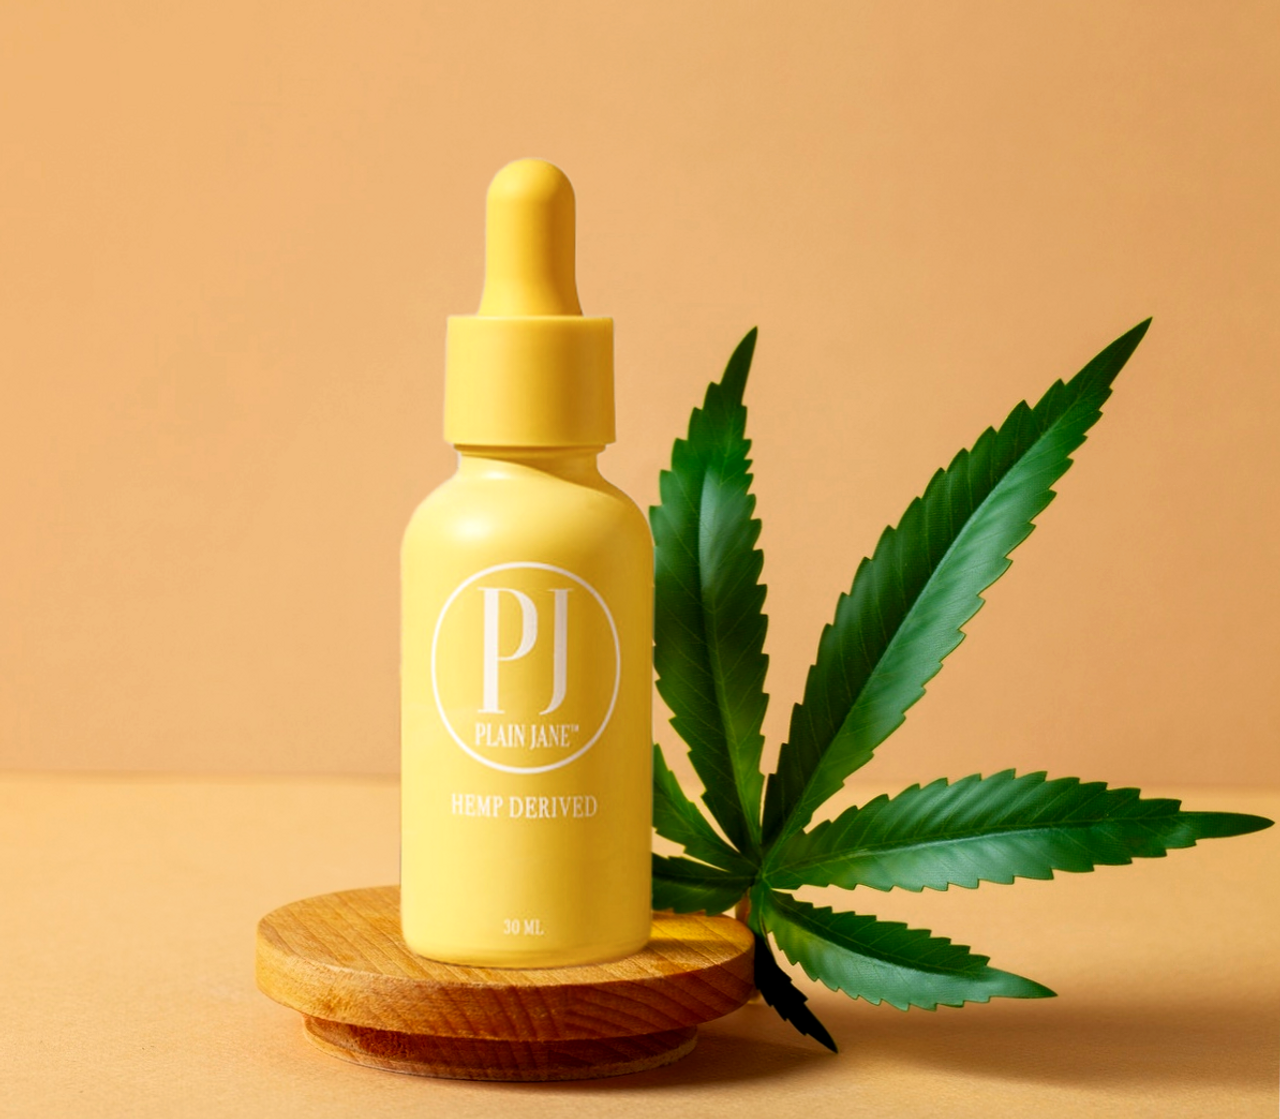 The Ultimate CBD Oil Comprehensive Review By Plainjane